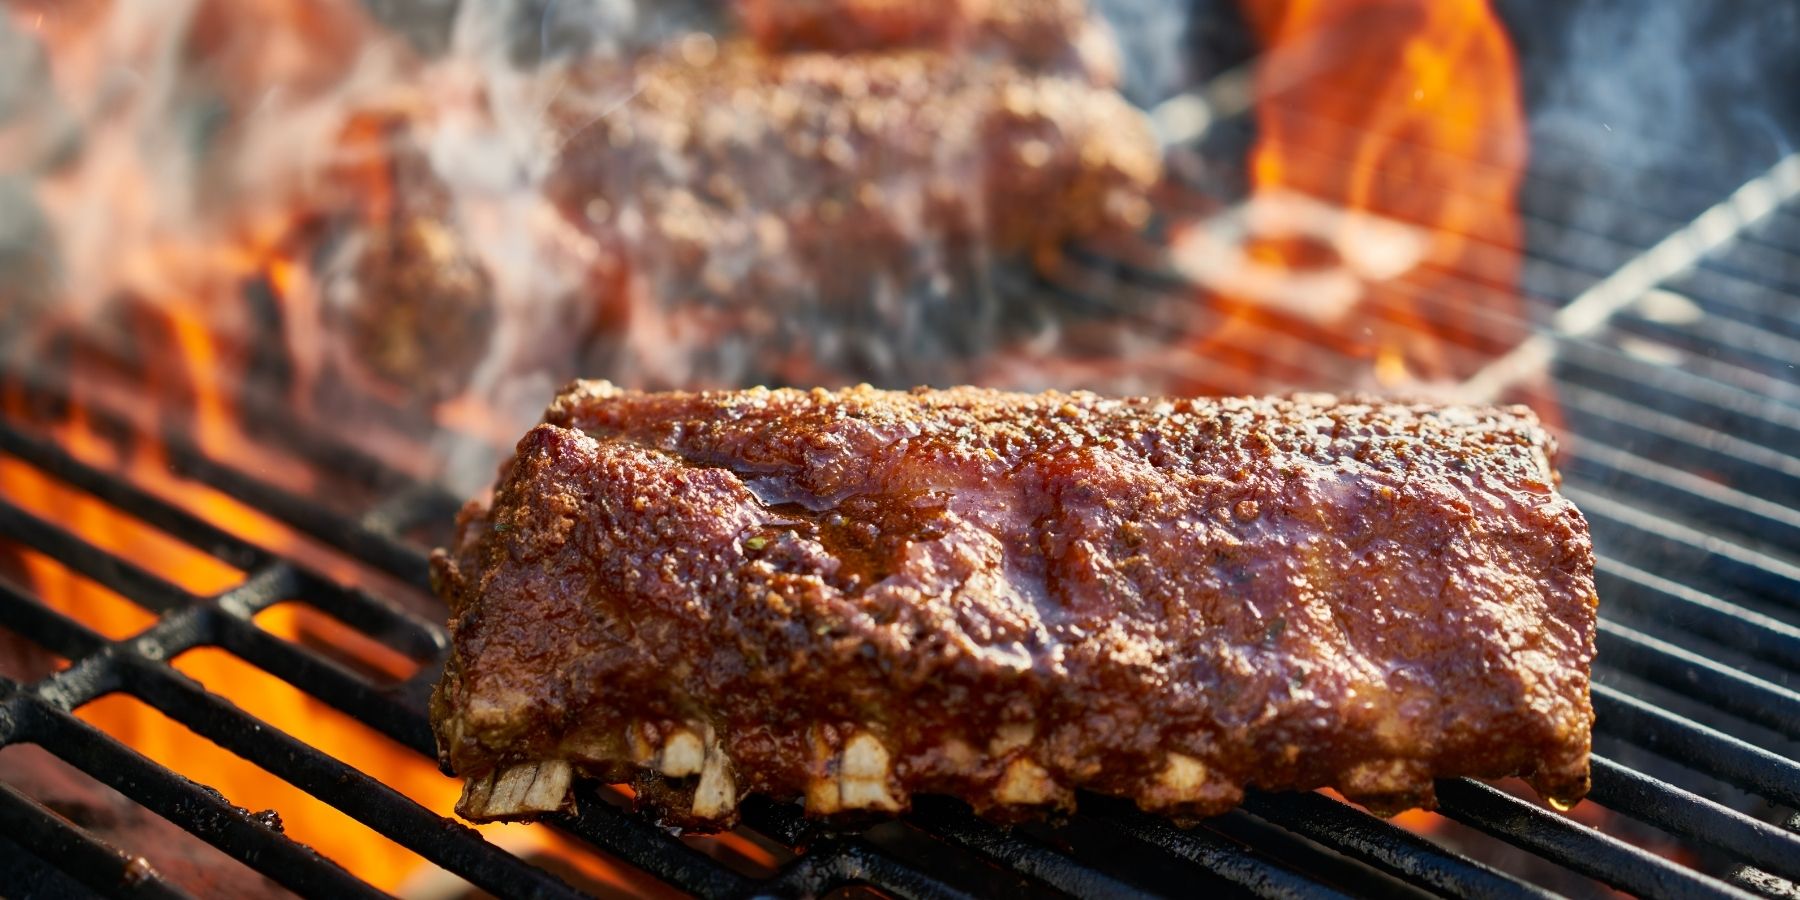 How Long Does It Take To Smoke Ribs At 225 Degrees?